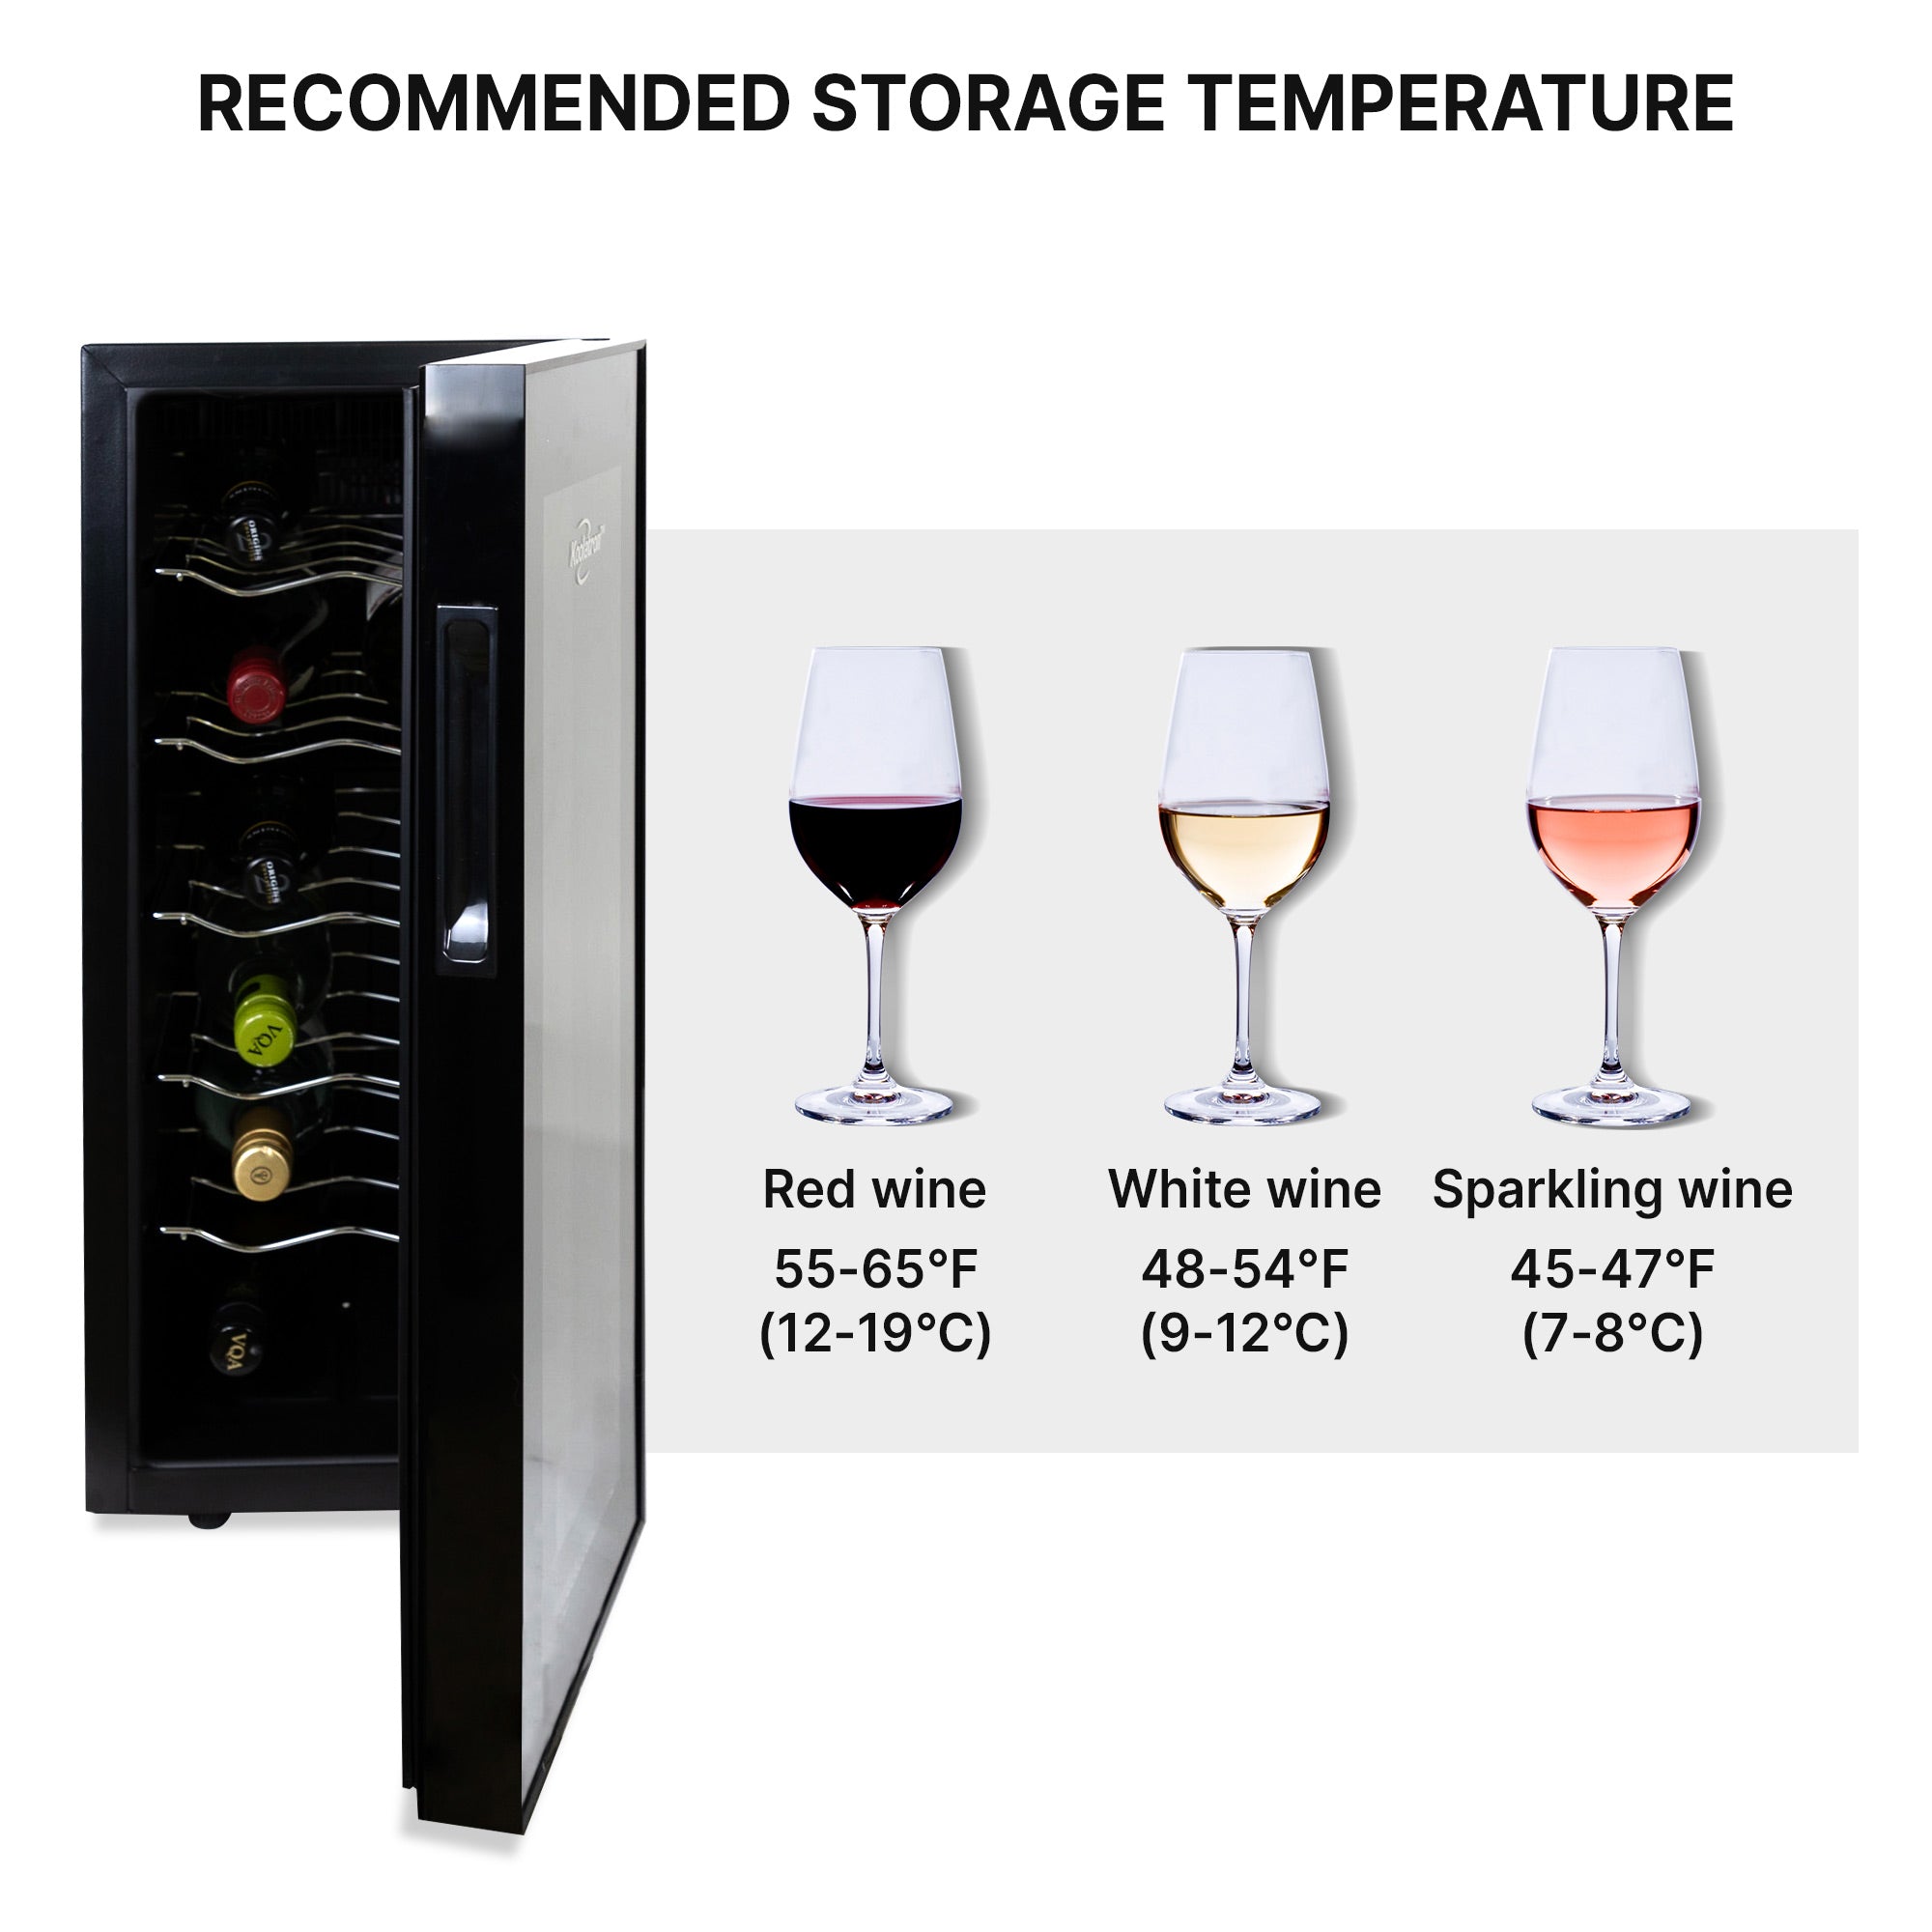 Koolatron 12 bottle wine fridge, open, with pictures of three wine glasses to the right containing red, white, and rose wines; Text above reads "Recommended serving temperature" and text below each glass describes the ideal temperature